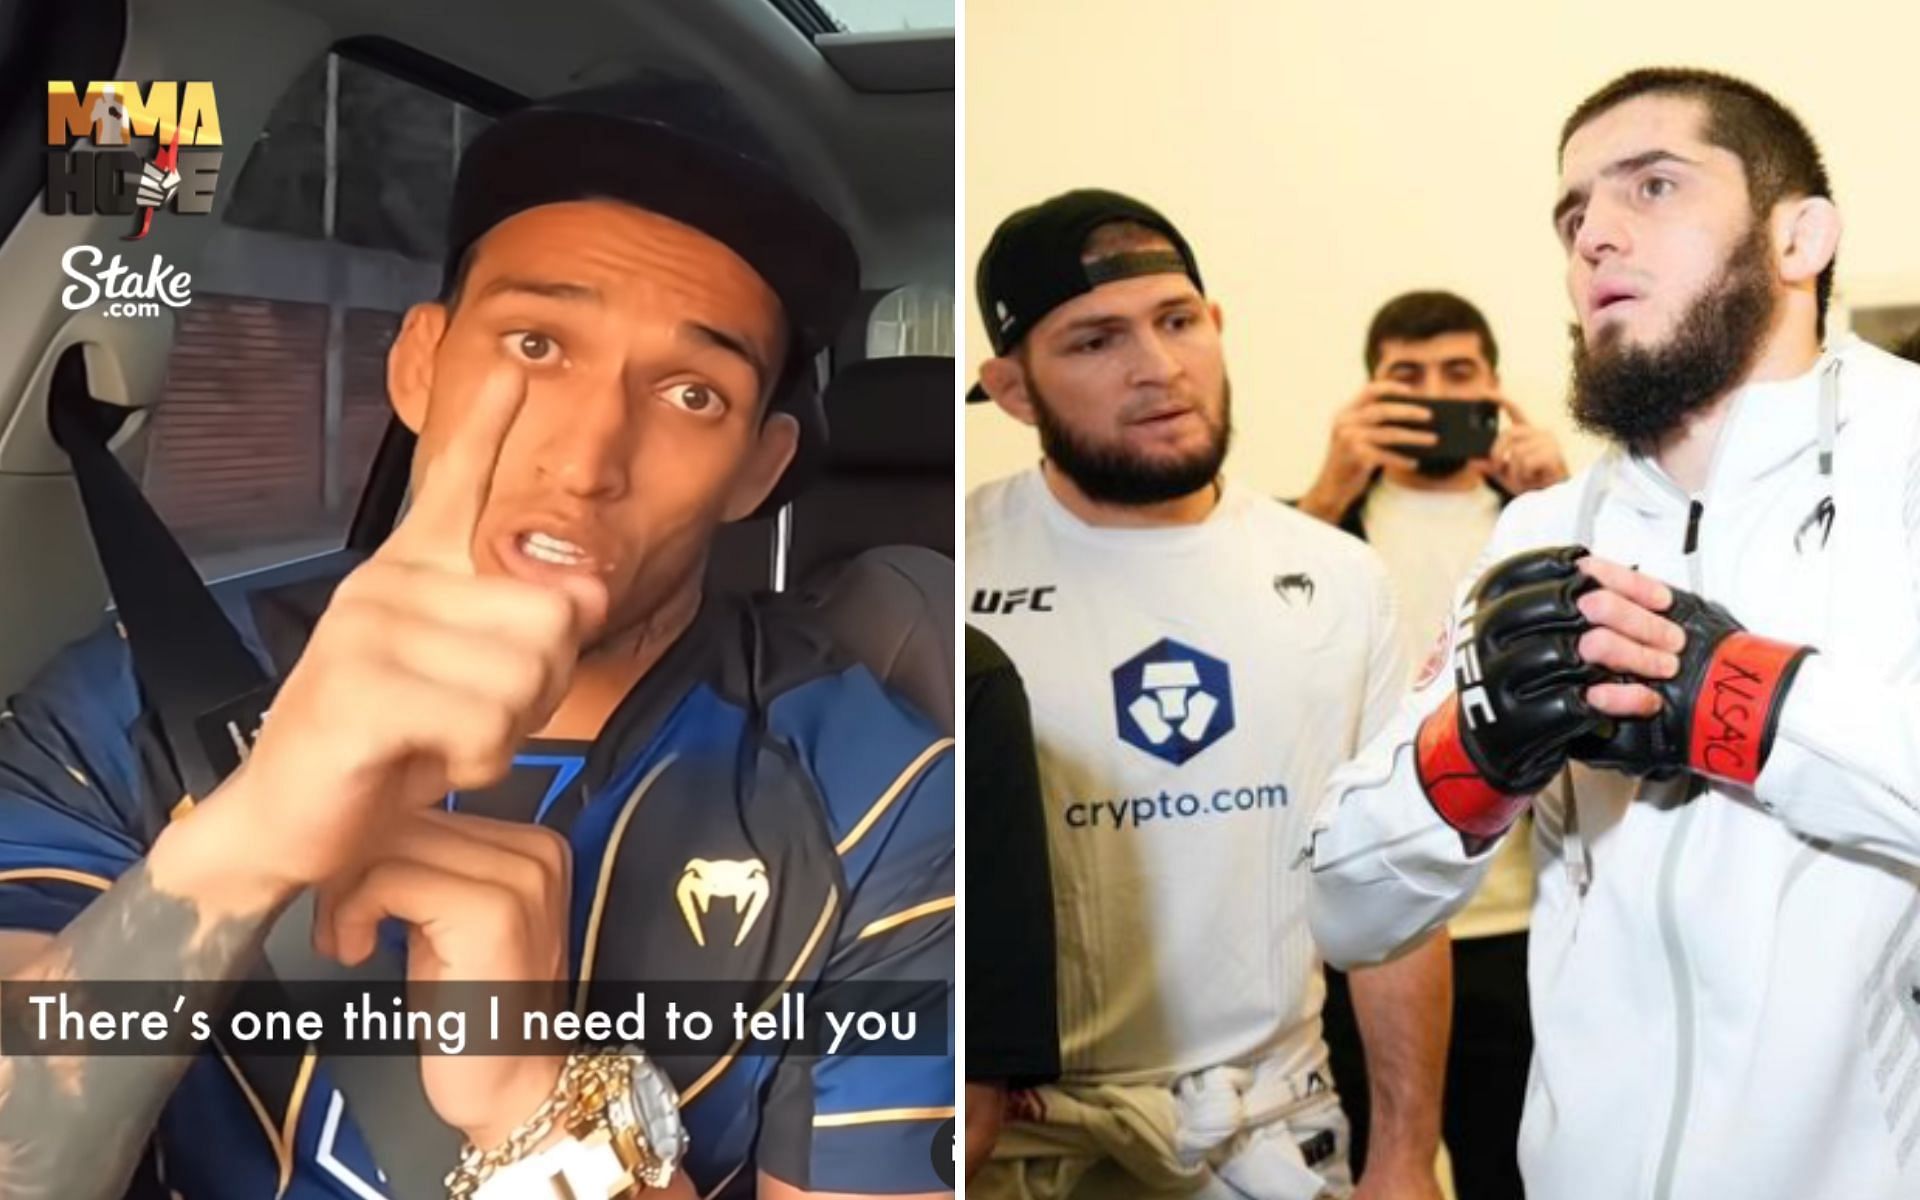 Charles Oliveira (L) and Islam Makhachev (R) [Images Courtesy: @mmahoje and @islam_makhachev on Instagram]